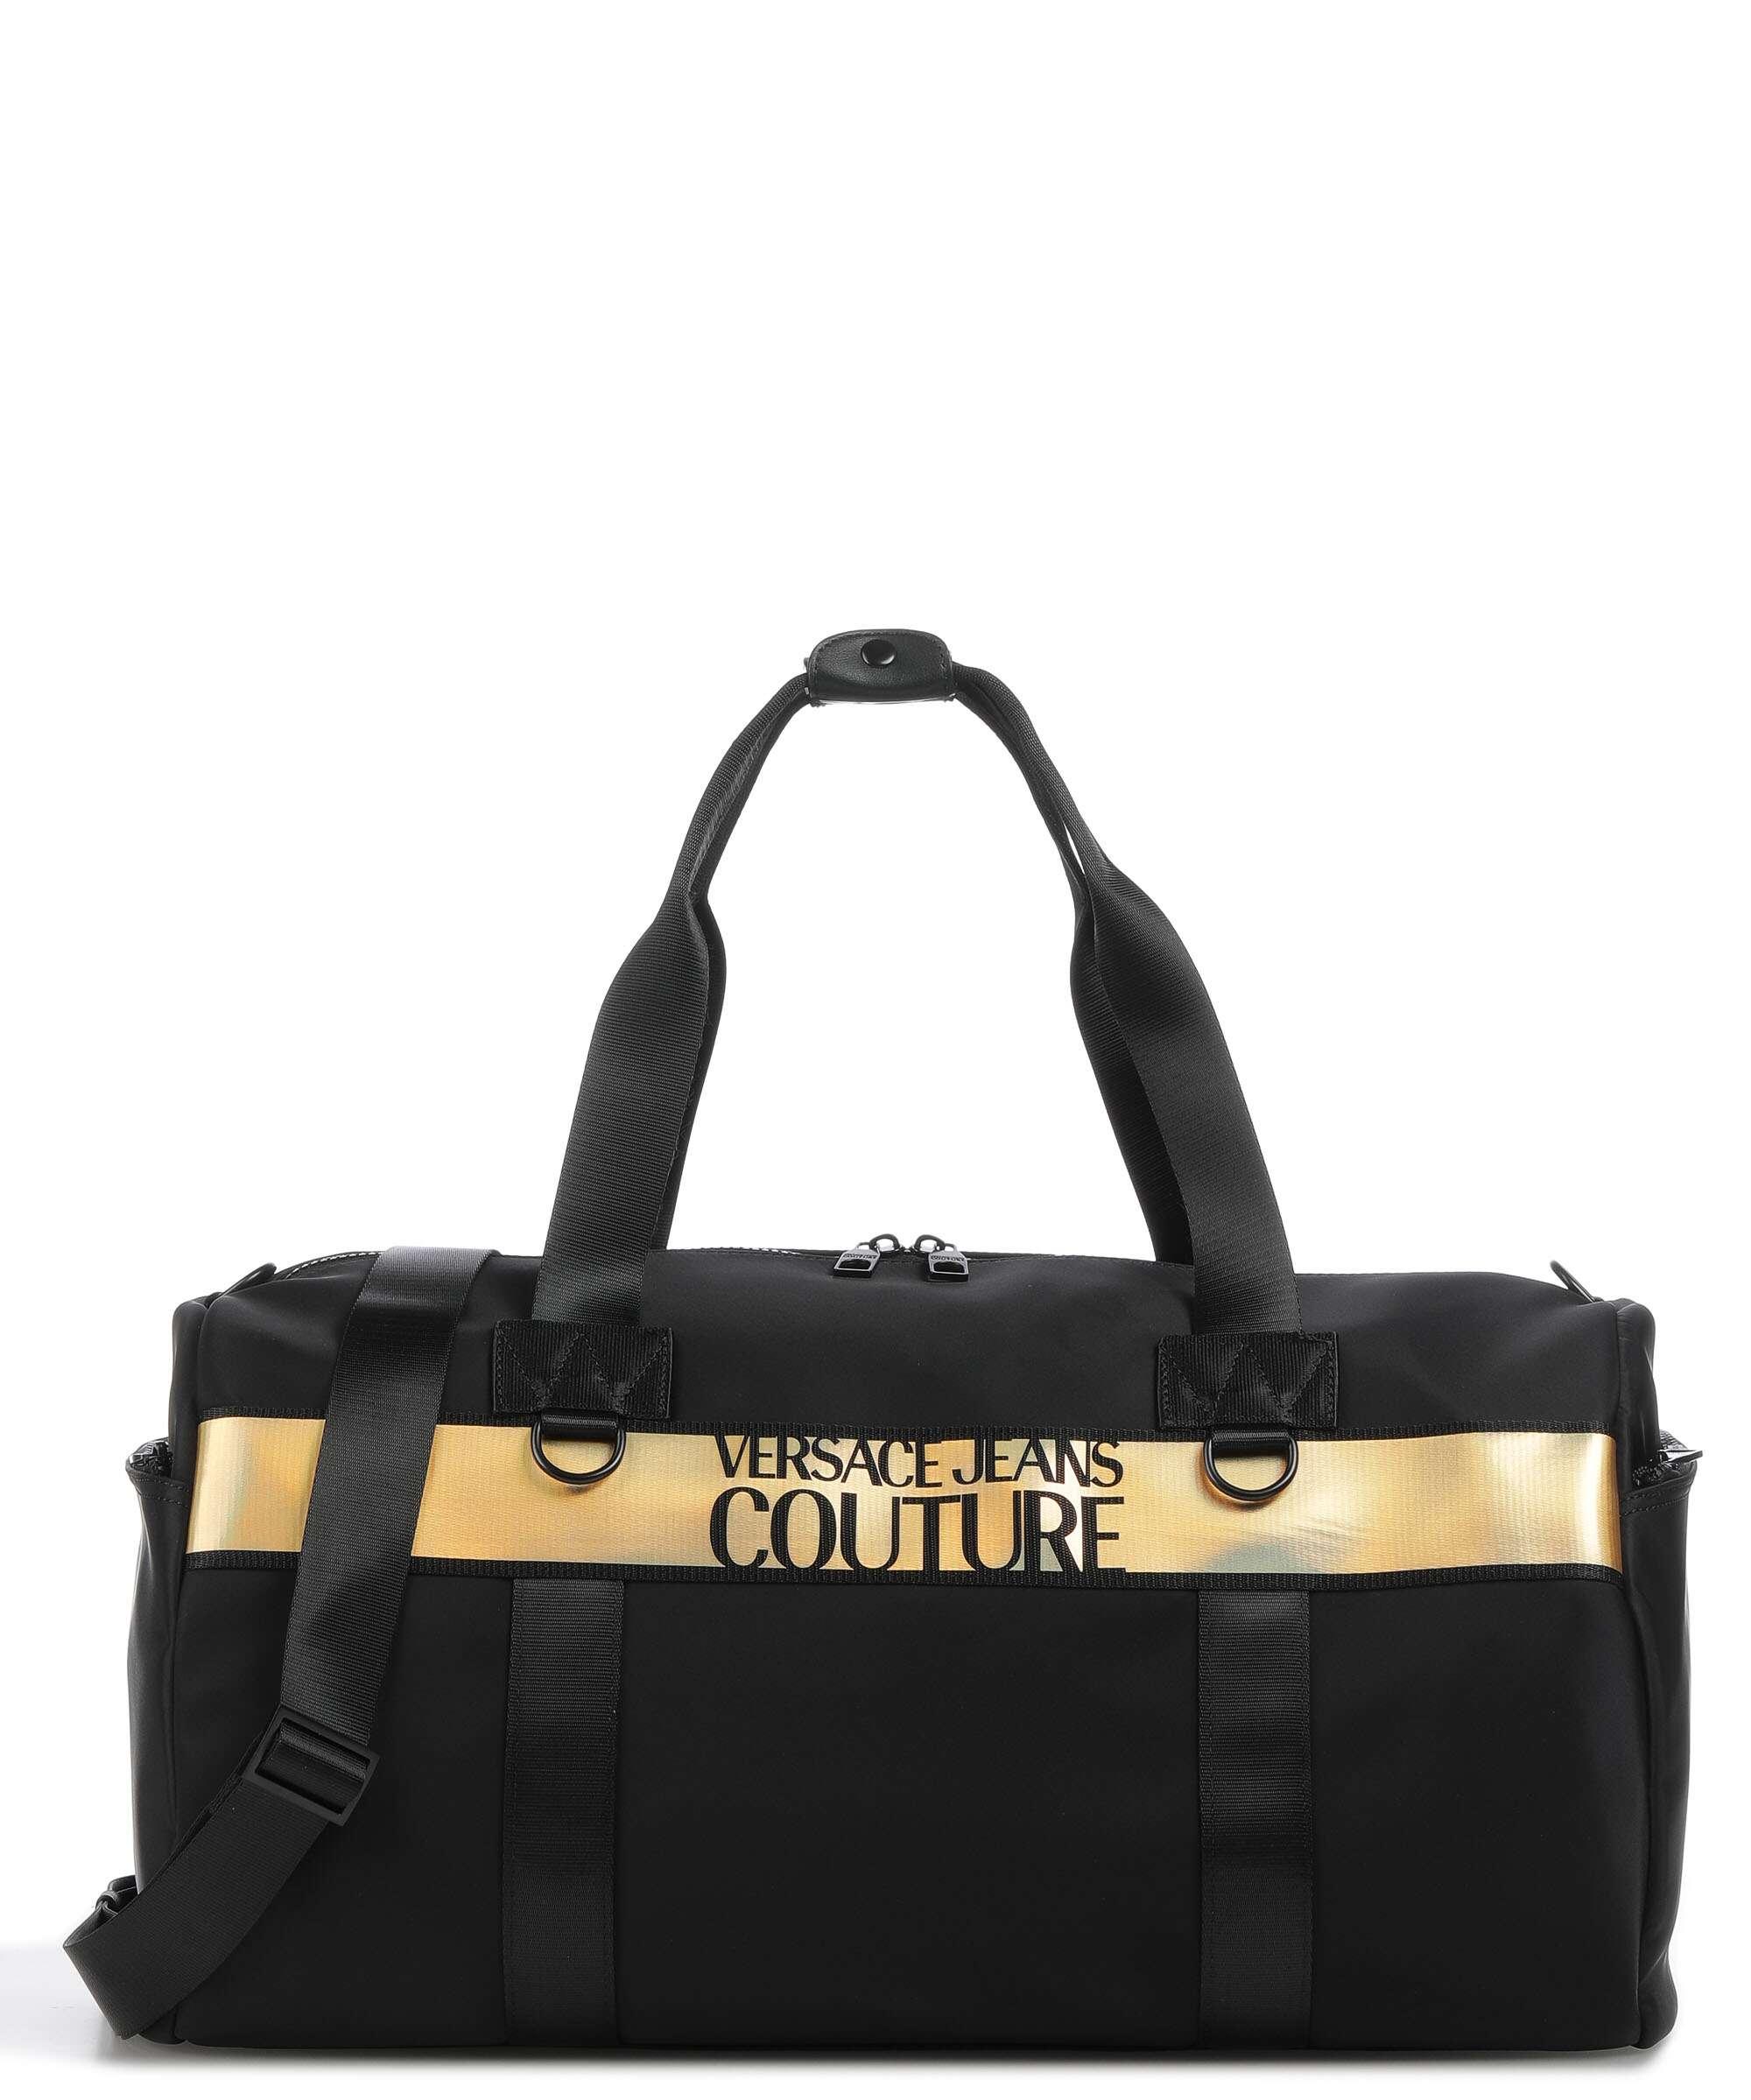 Versace Jeans Couture Iconic Logo Weekender schwarz 52 cm